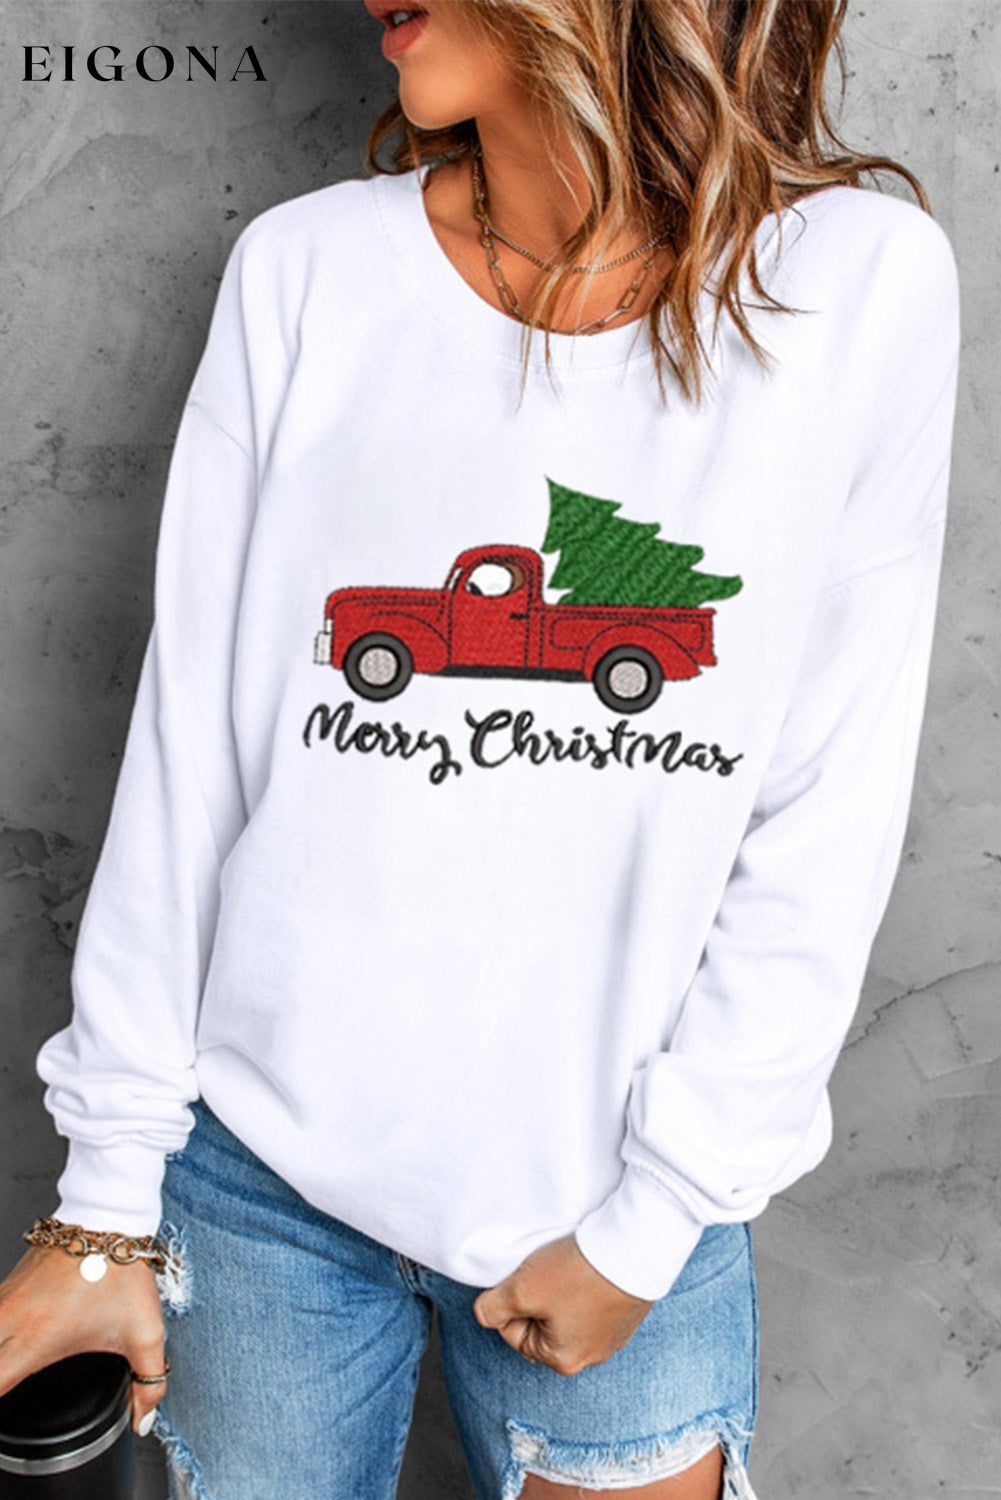 MERRY CHRISTMAS Graphic Sweatshirt White Christmas sweater clothes Ship From Overseas SYNZ